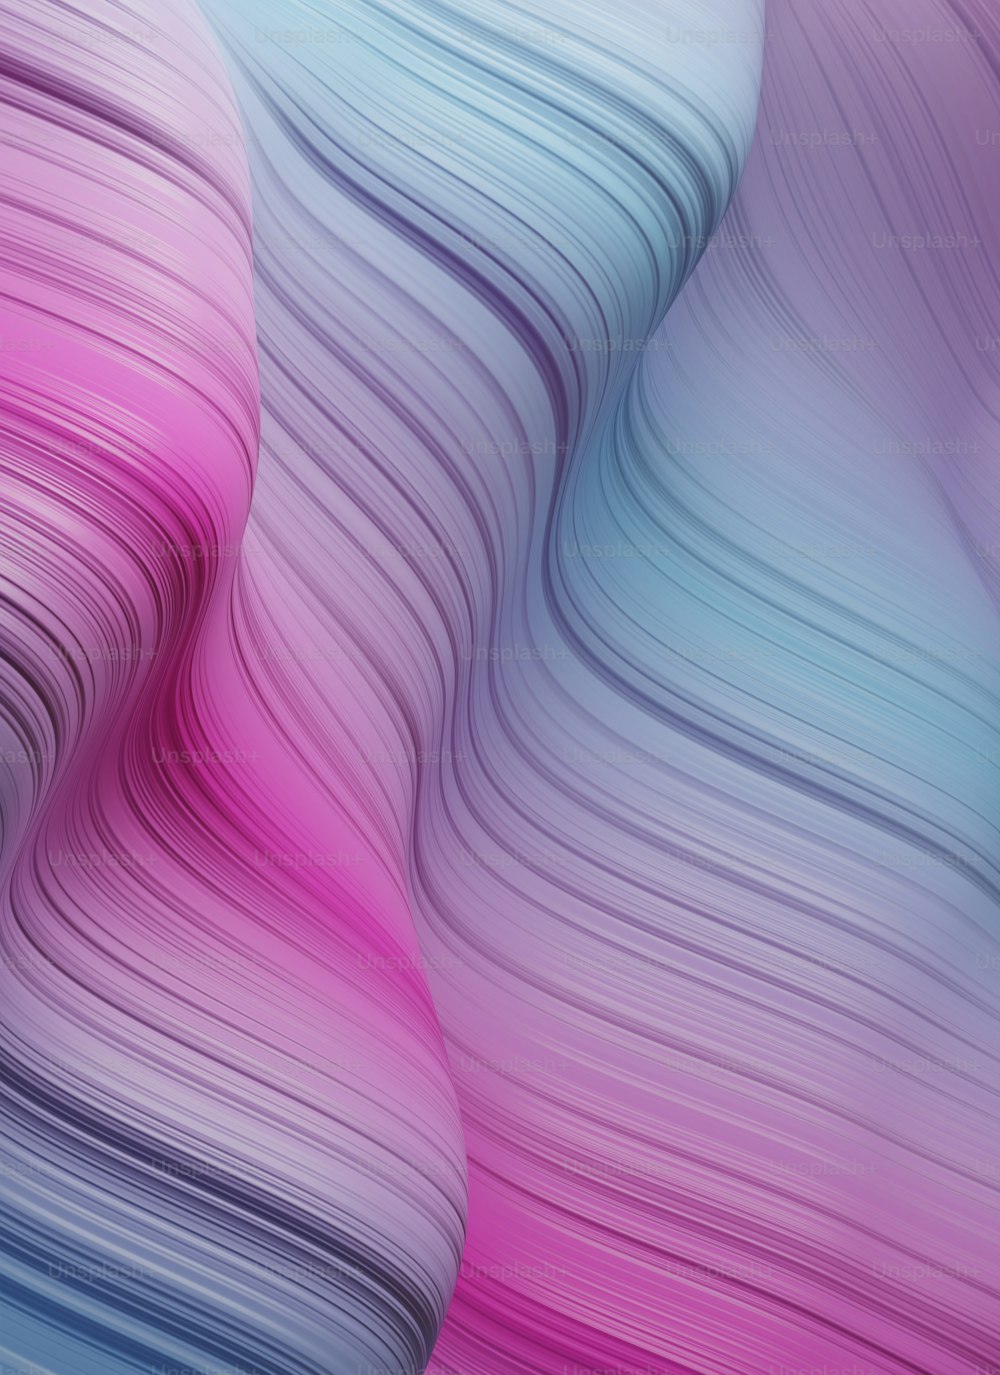 an abstract background with wavy lines in pink, blue and white